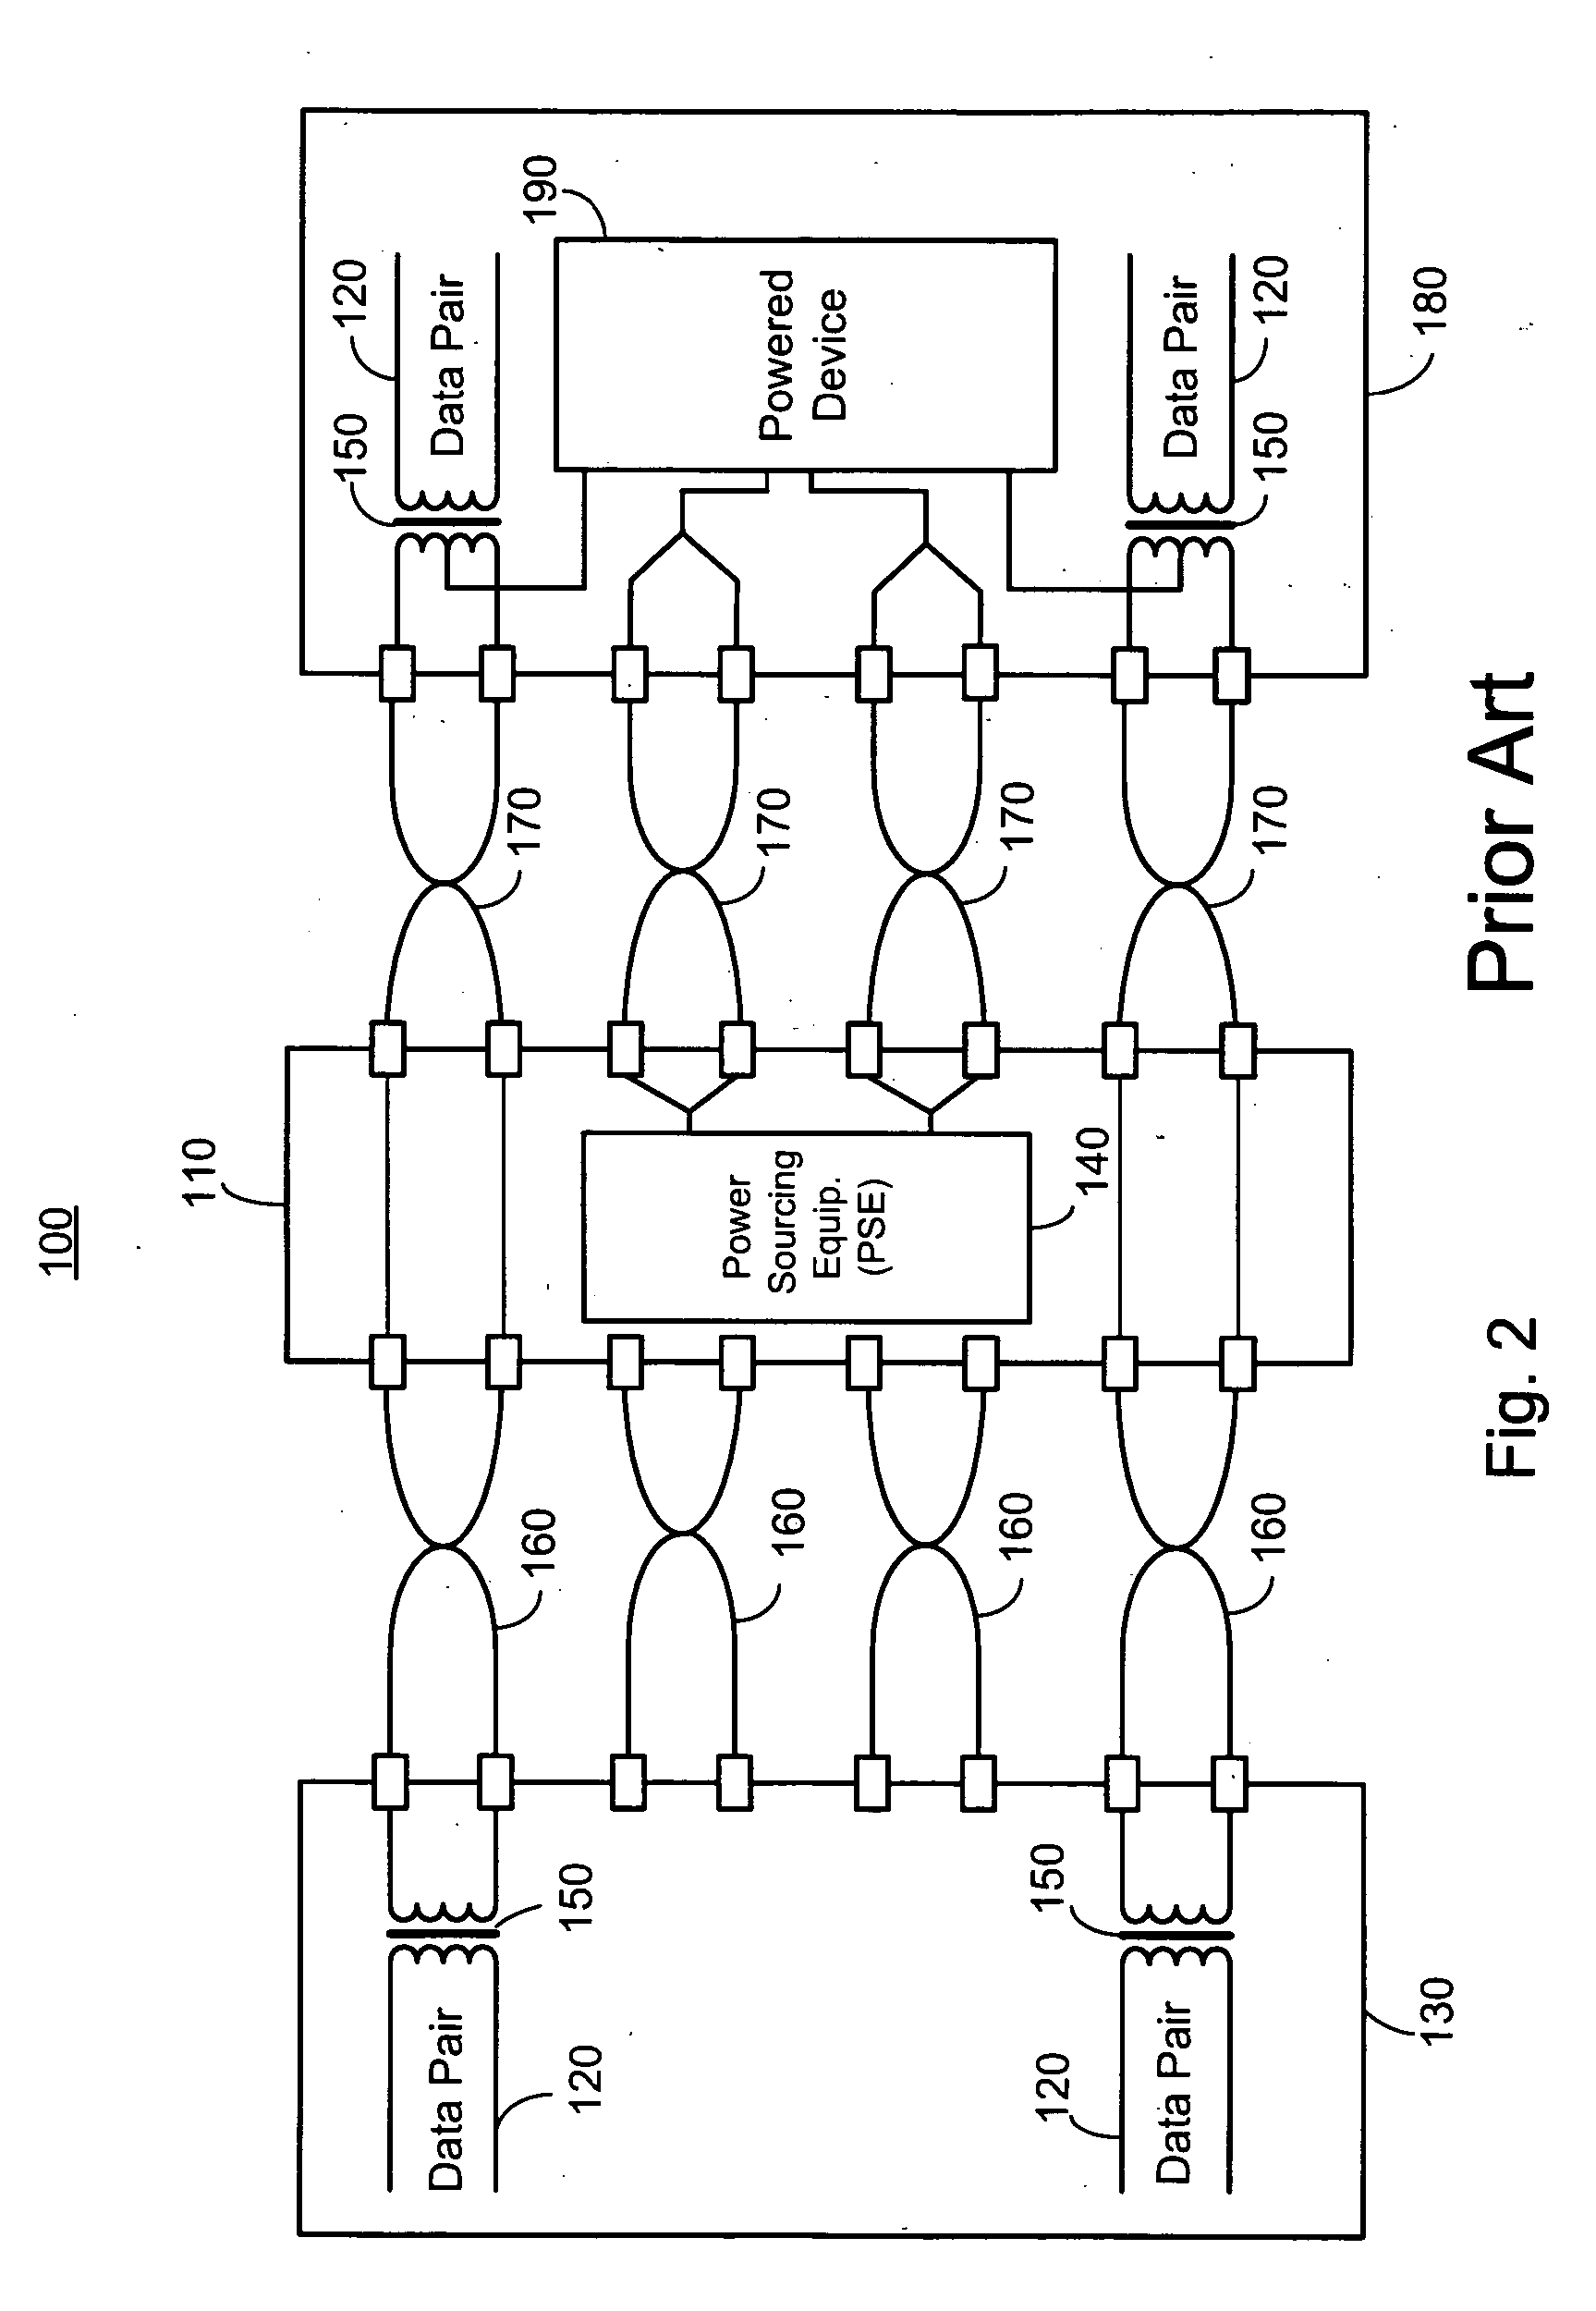 System for providing power over Ethernet through a patch panel